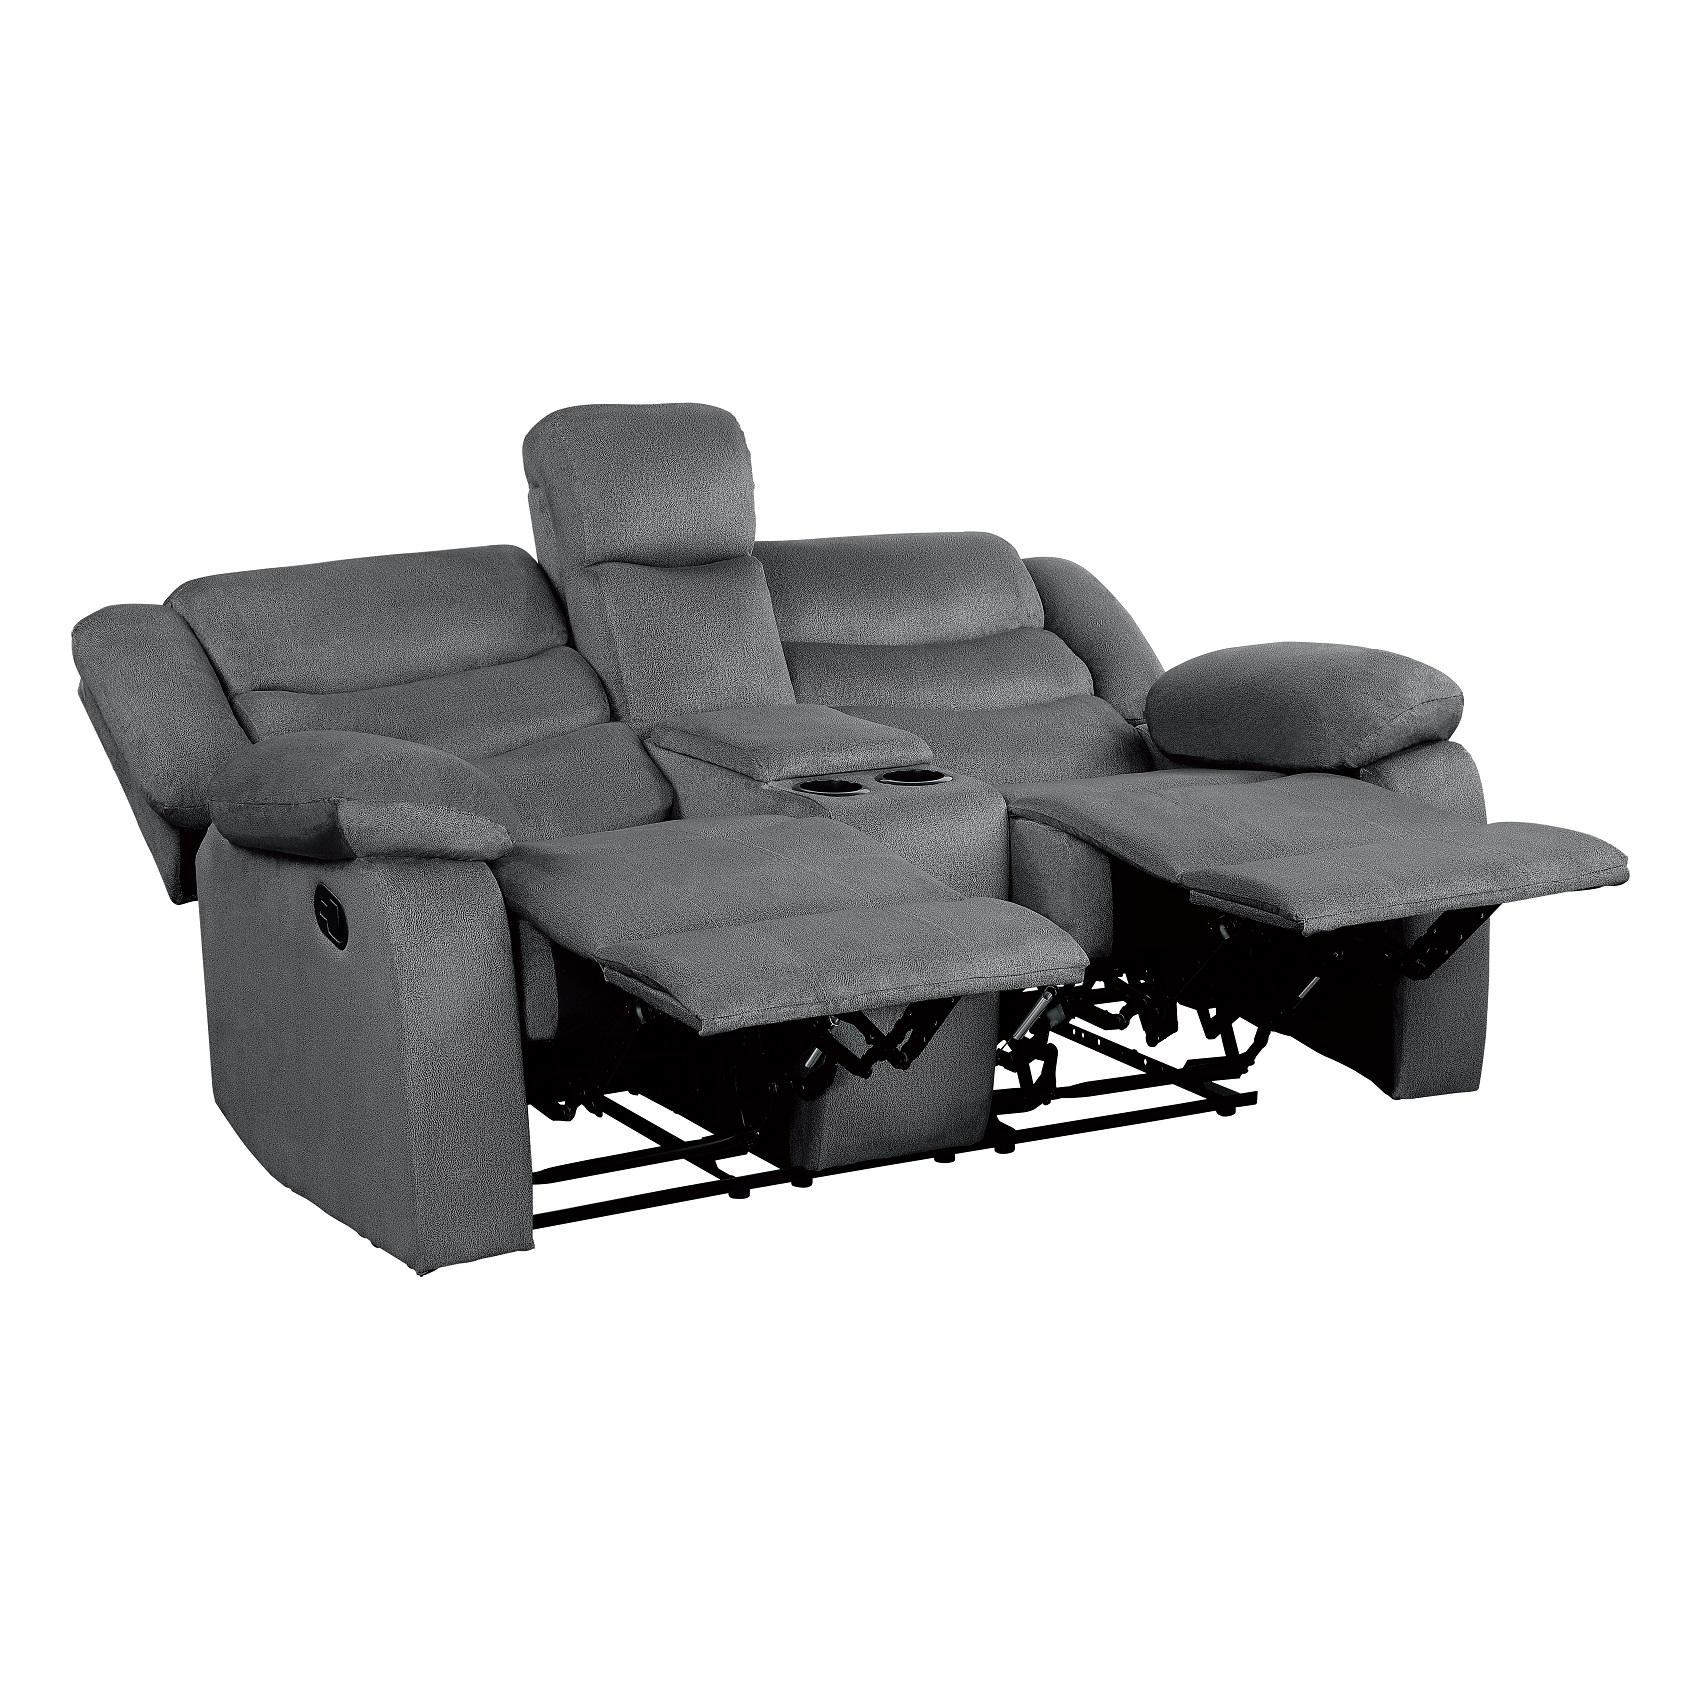 

    
9526GY-2PC Transitional Gray Microfiber Reclining Sofa Set 2pcs Homelegance 9526GY Discus
